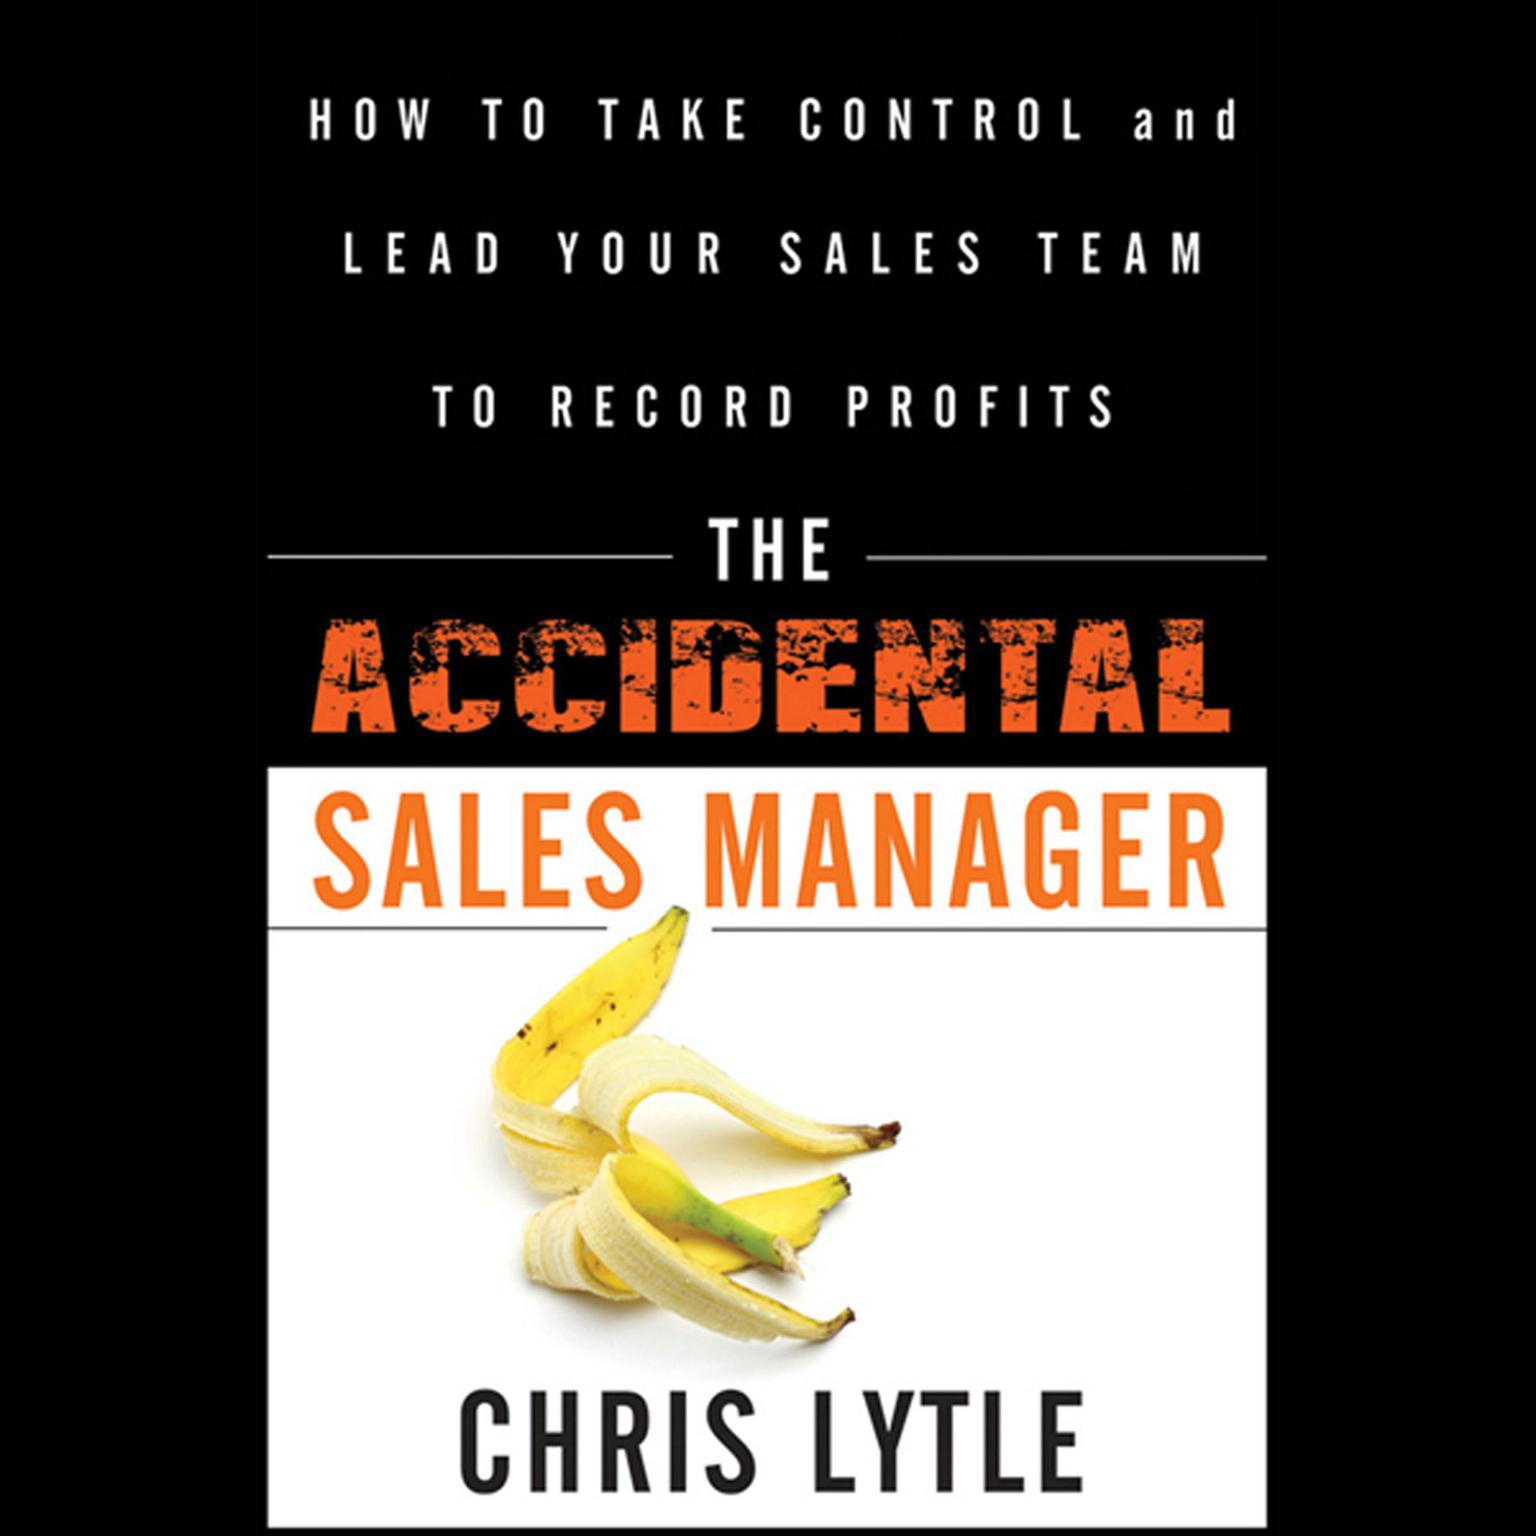 The Accidental Sales Manager: How to Take Control and Lead Your Sales Team to Record Profits Audiobook, by Chris Lytle